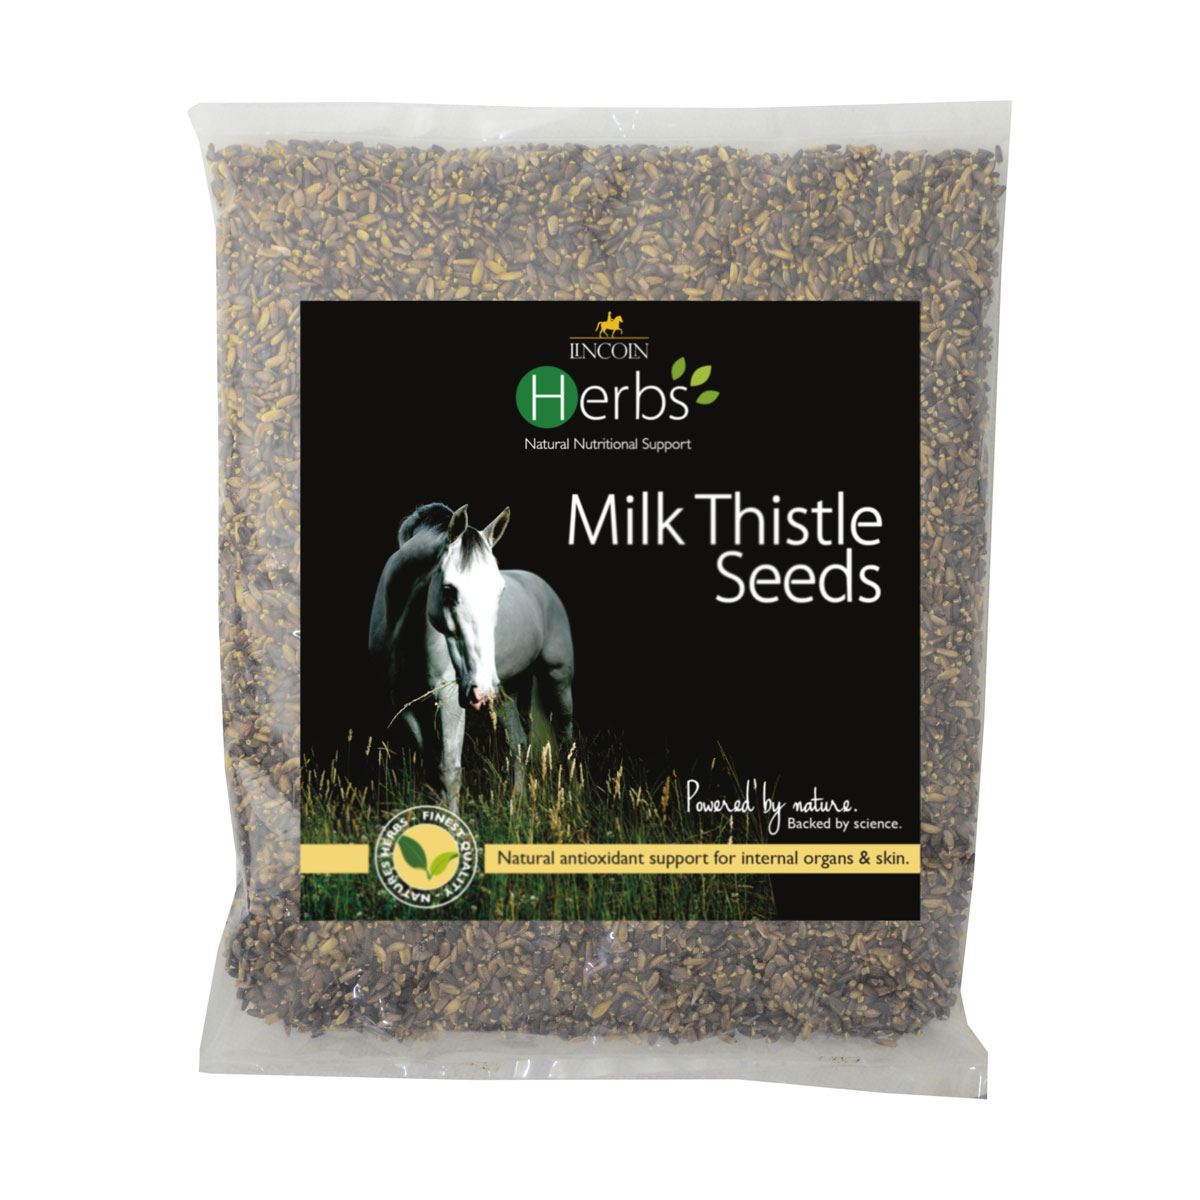 Lincoln Herbs Milk Thistle Seeds - Just Horse Riders